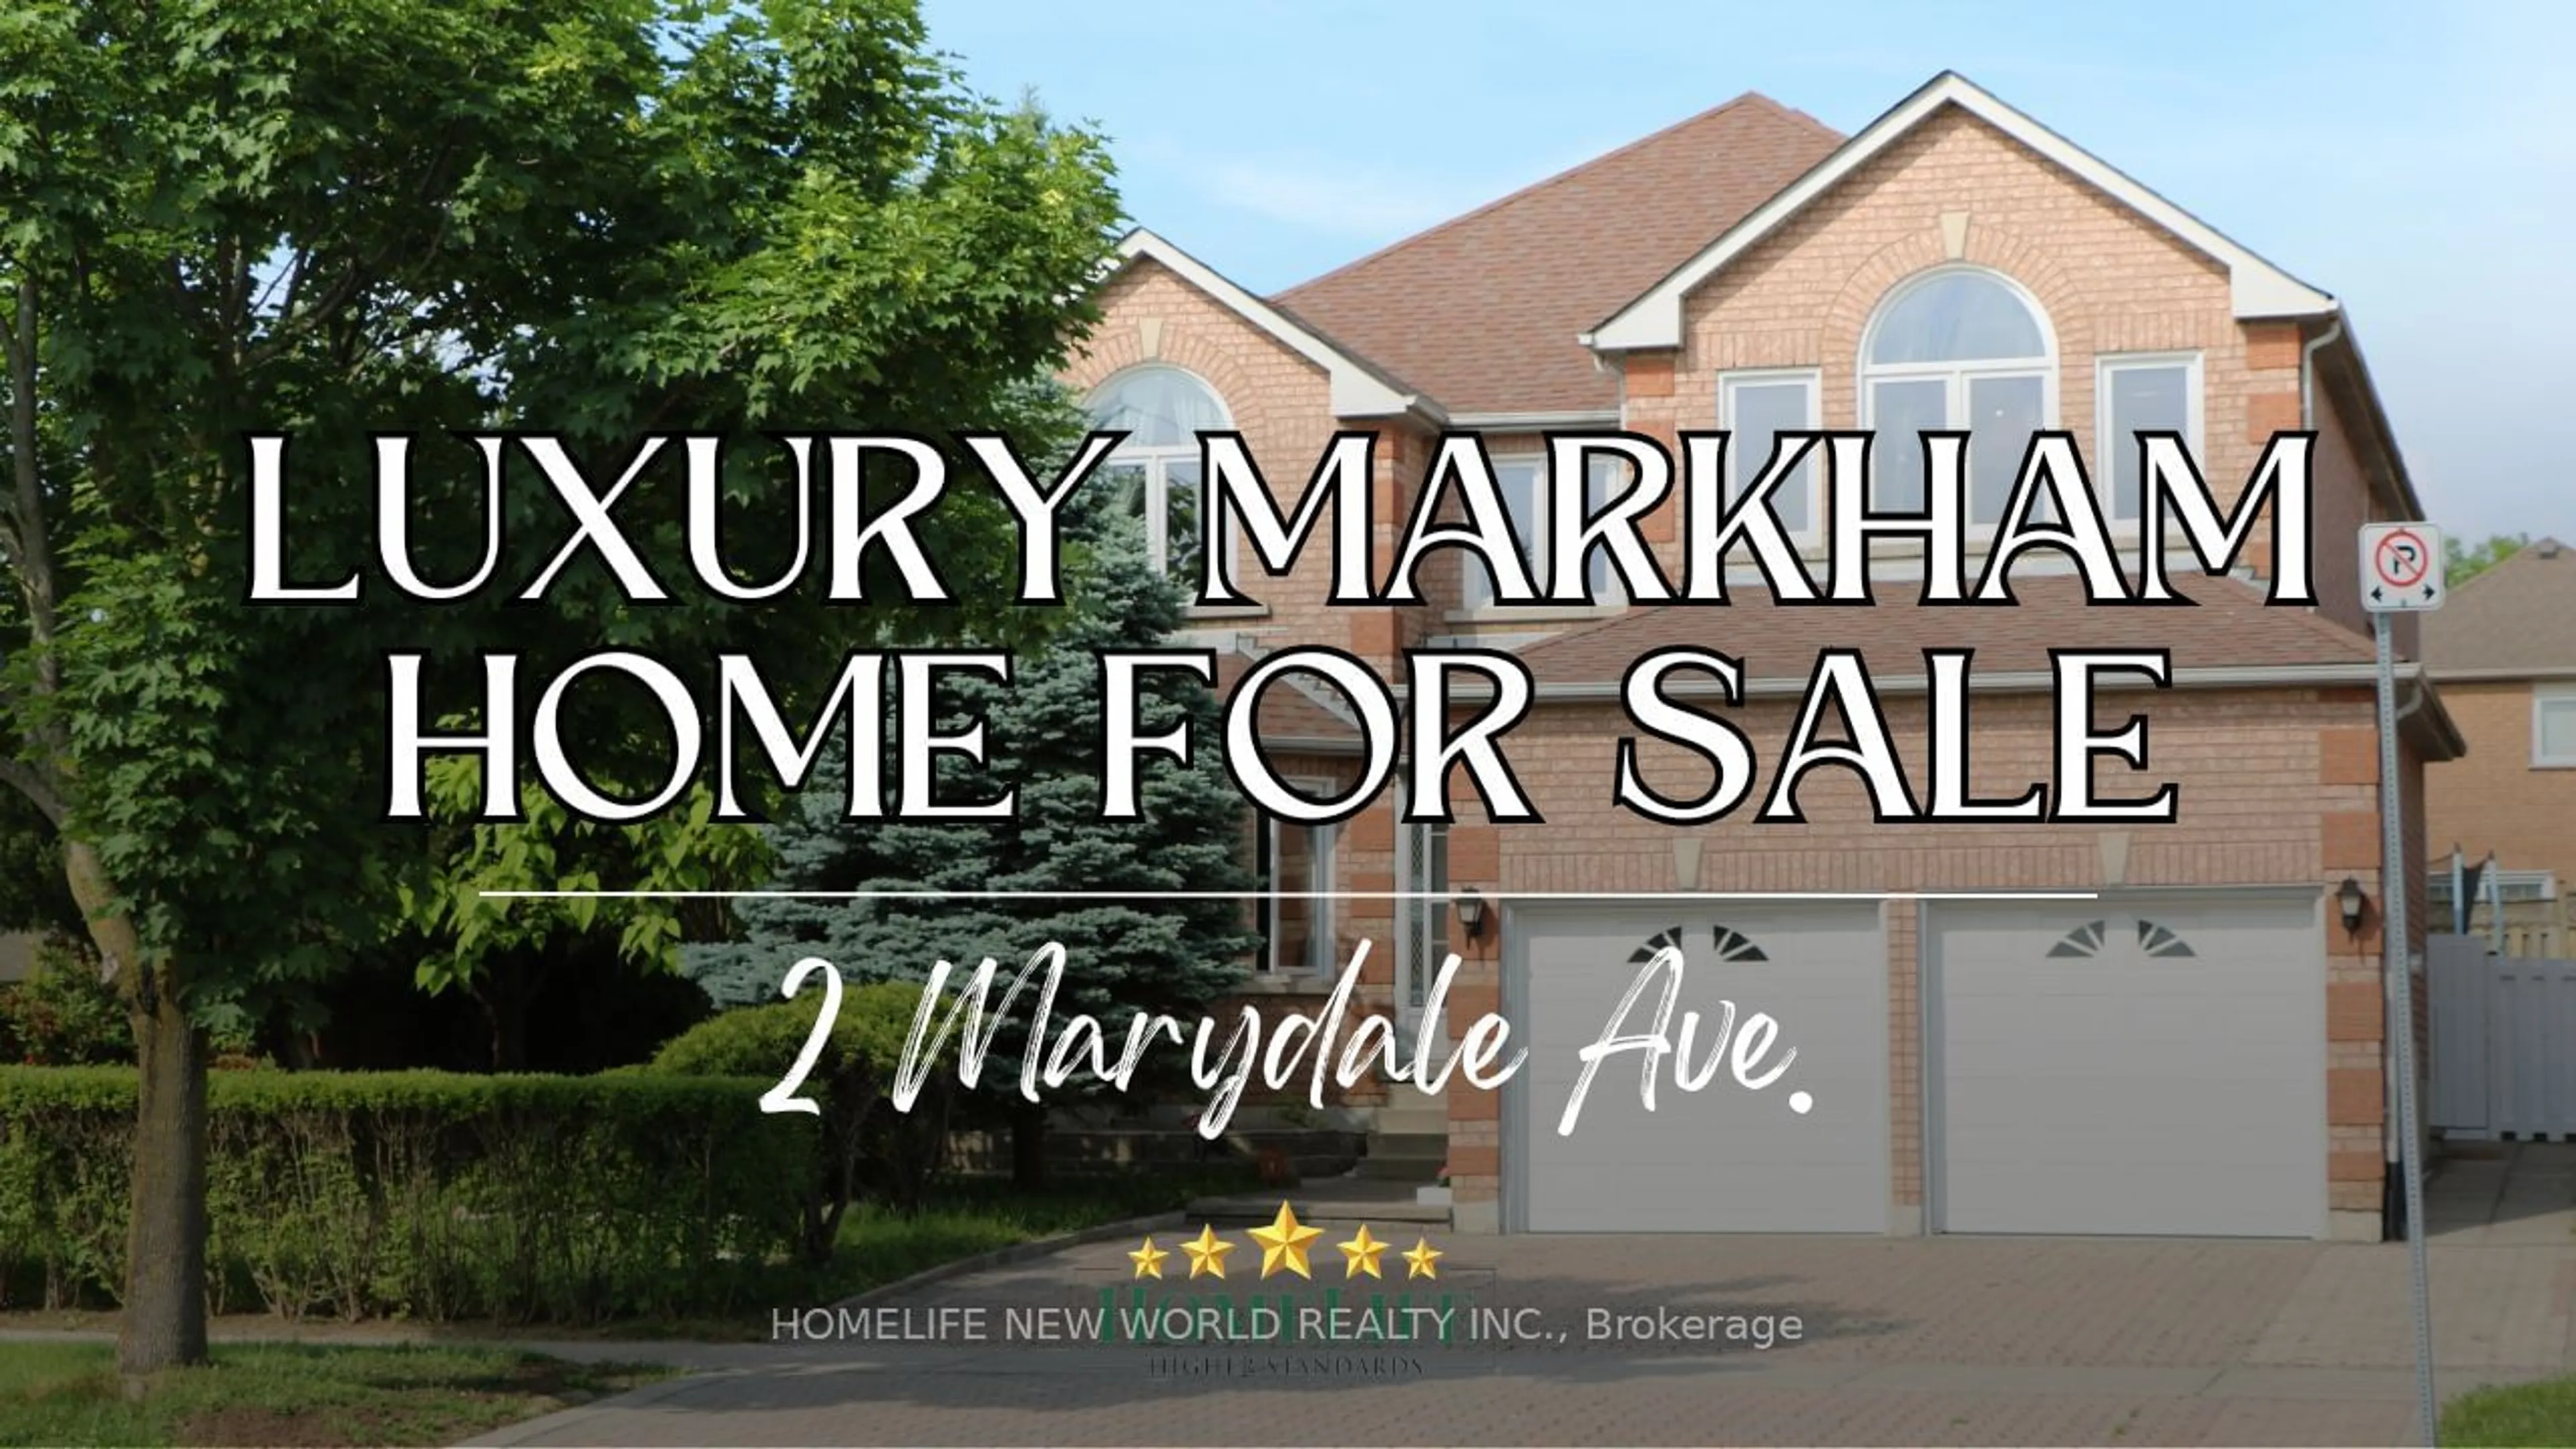 Home with vinyl exterior material for 2 Marydale Ave, Markham Ontario L3S 3N4